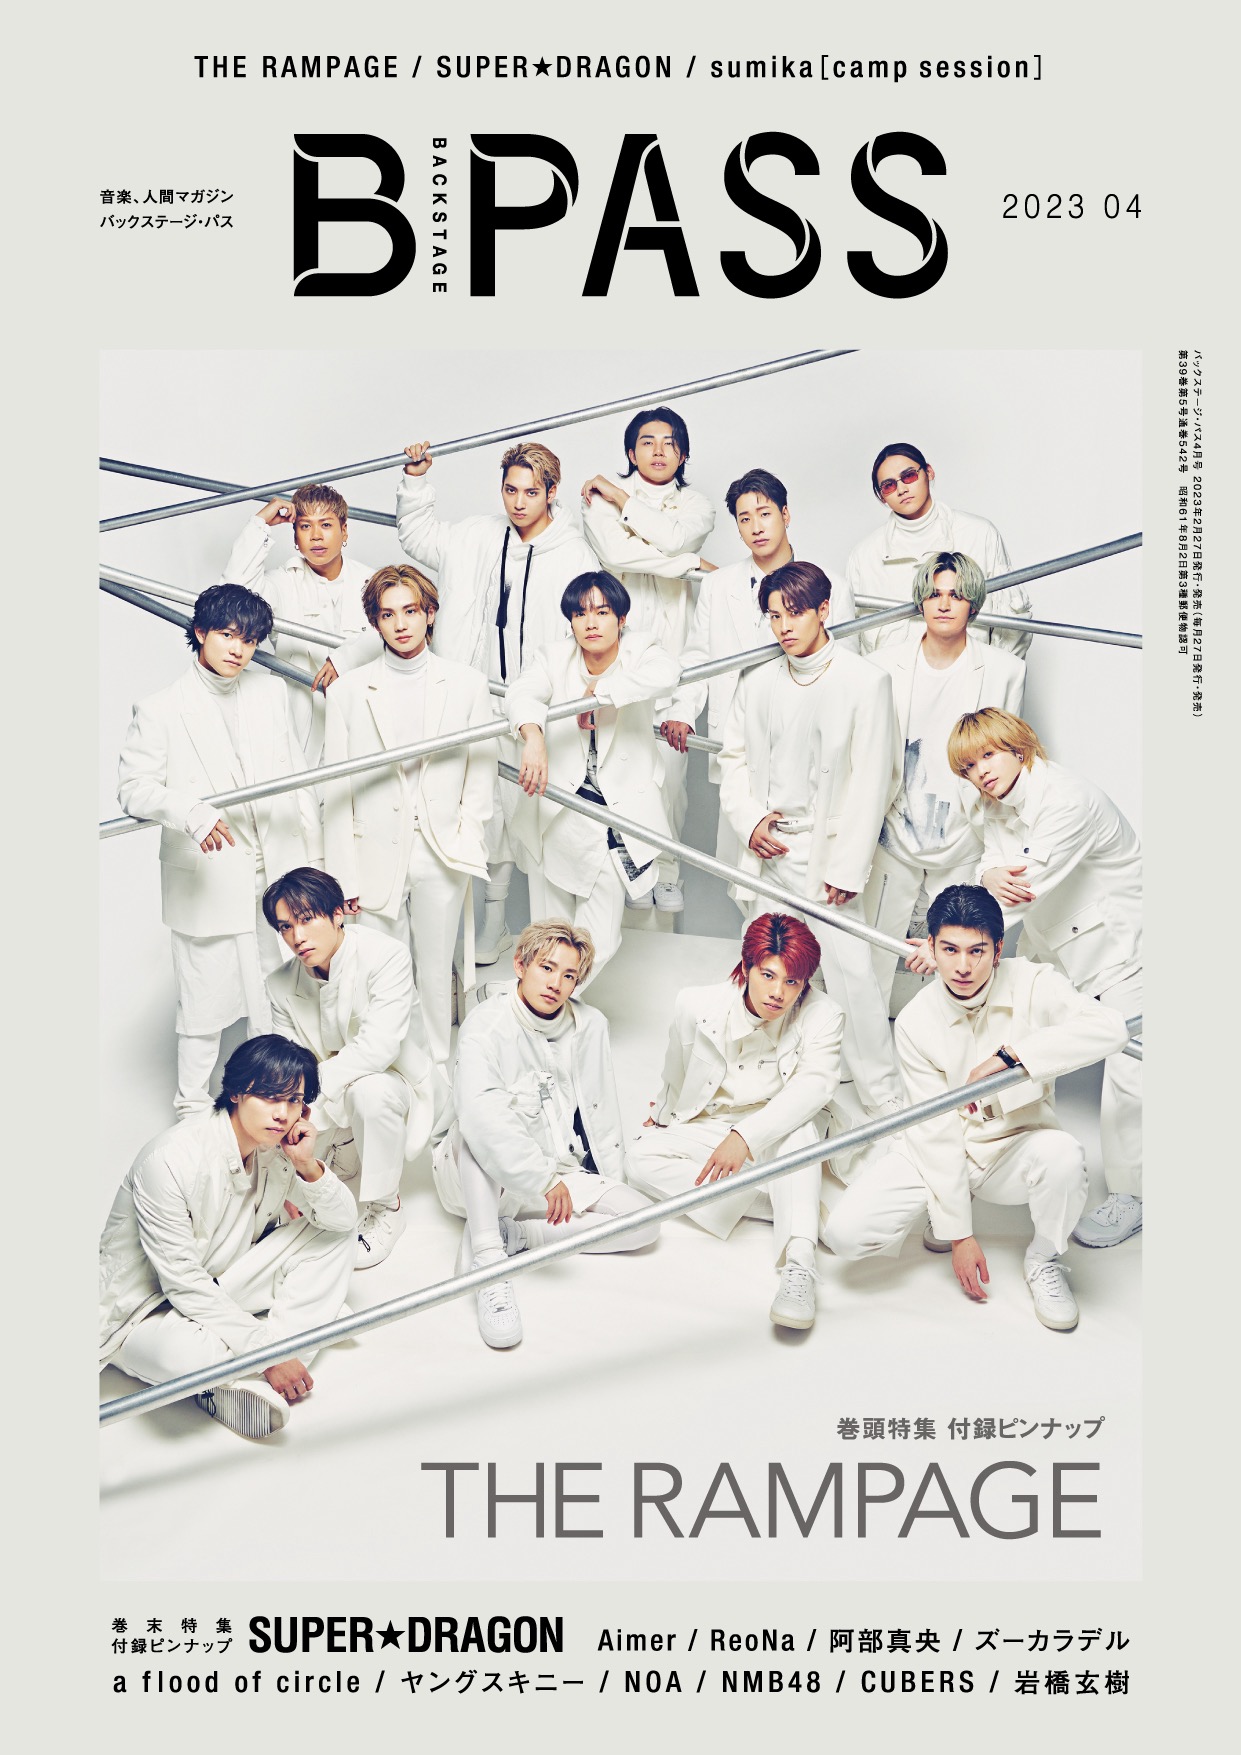 THE RAMPAGE＆SUPER★DRAGON、『BACKSTAGE PASS』4月号に降臨 - 画像一覧（2/3）